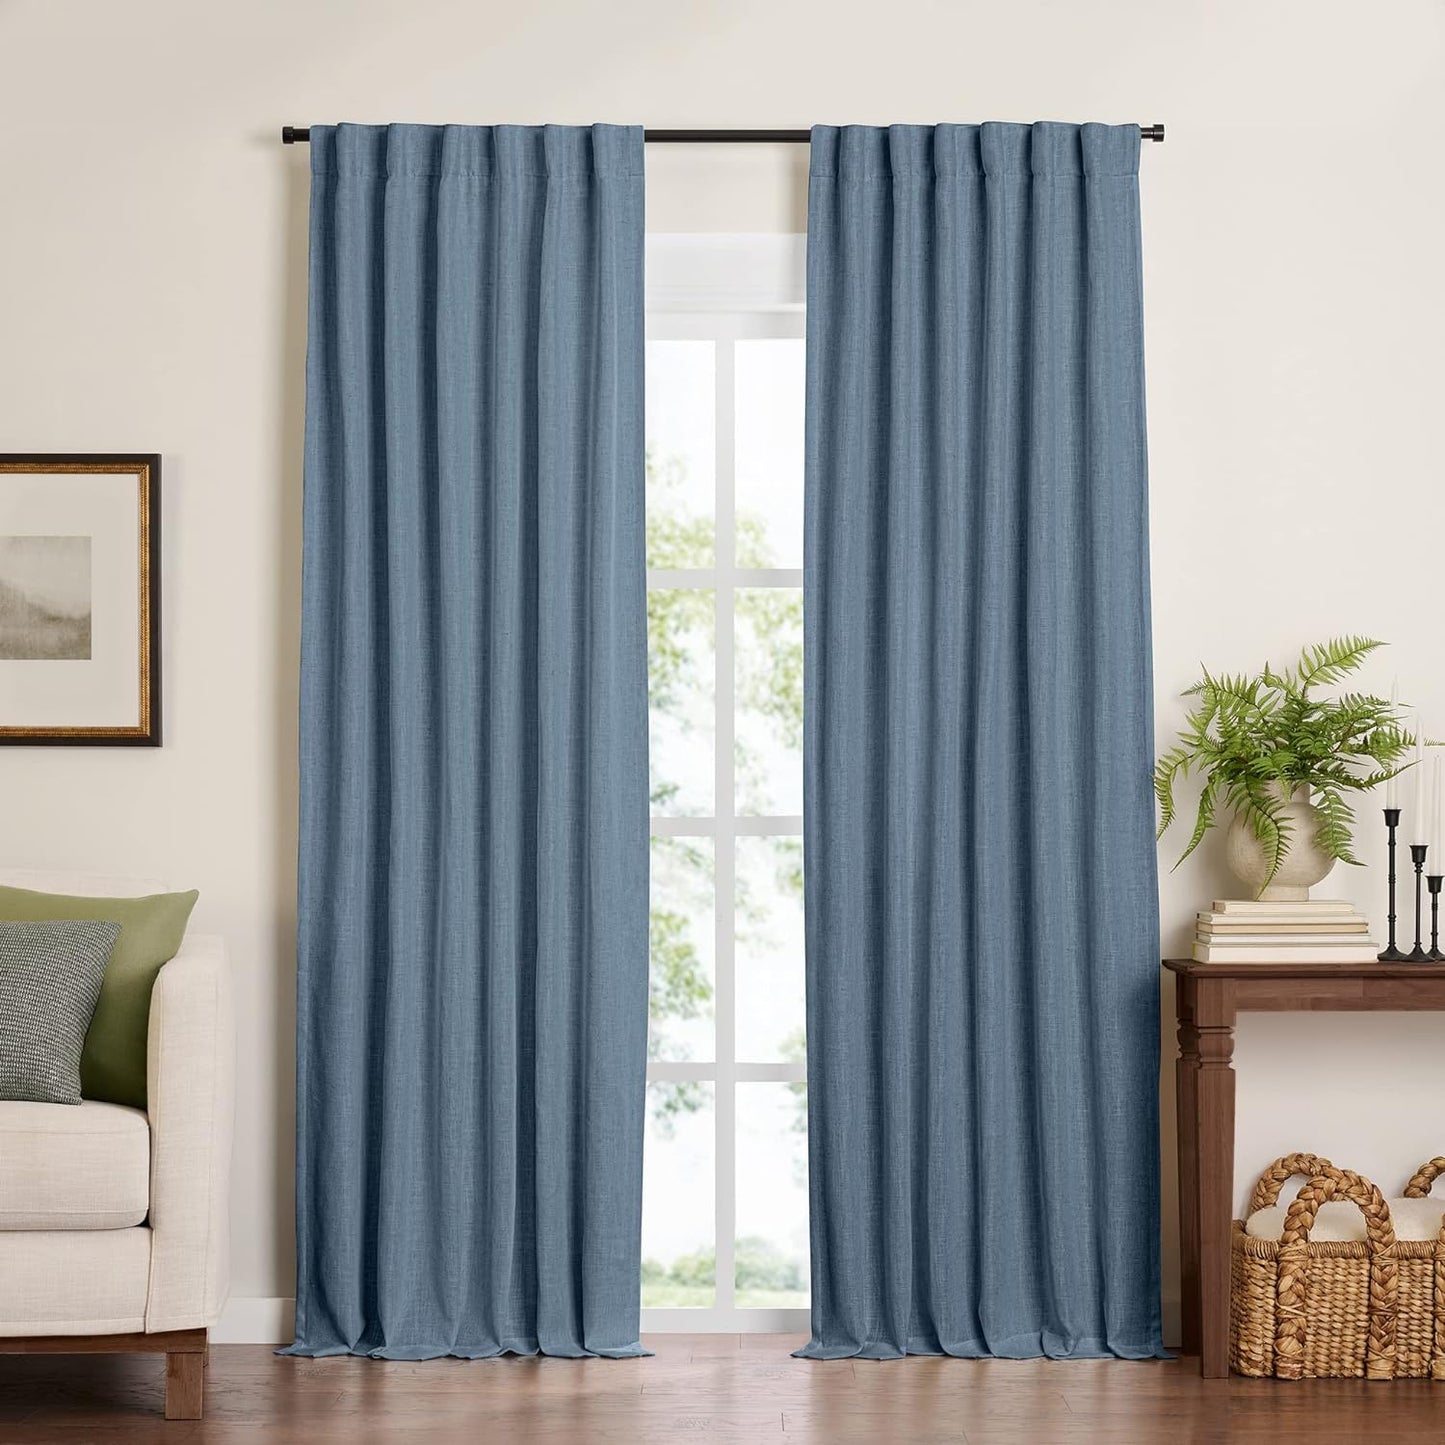 Elrene Home Fashions Harrow Solid Texture Blackout Single Window Curtain Panel, 52"X84", Natural  Elrene Home Fashions Blue 52"X84" (1 Panel) 